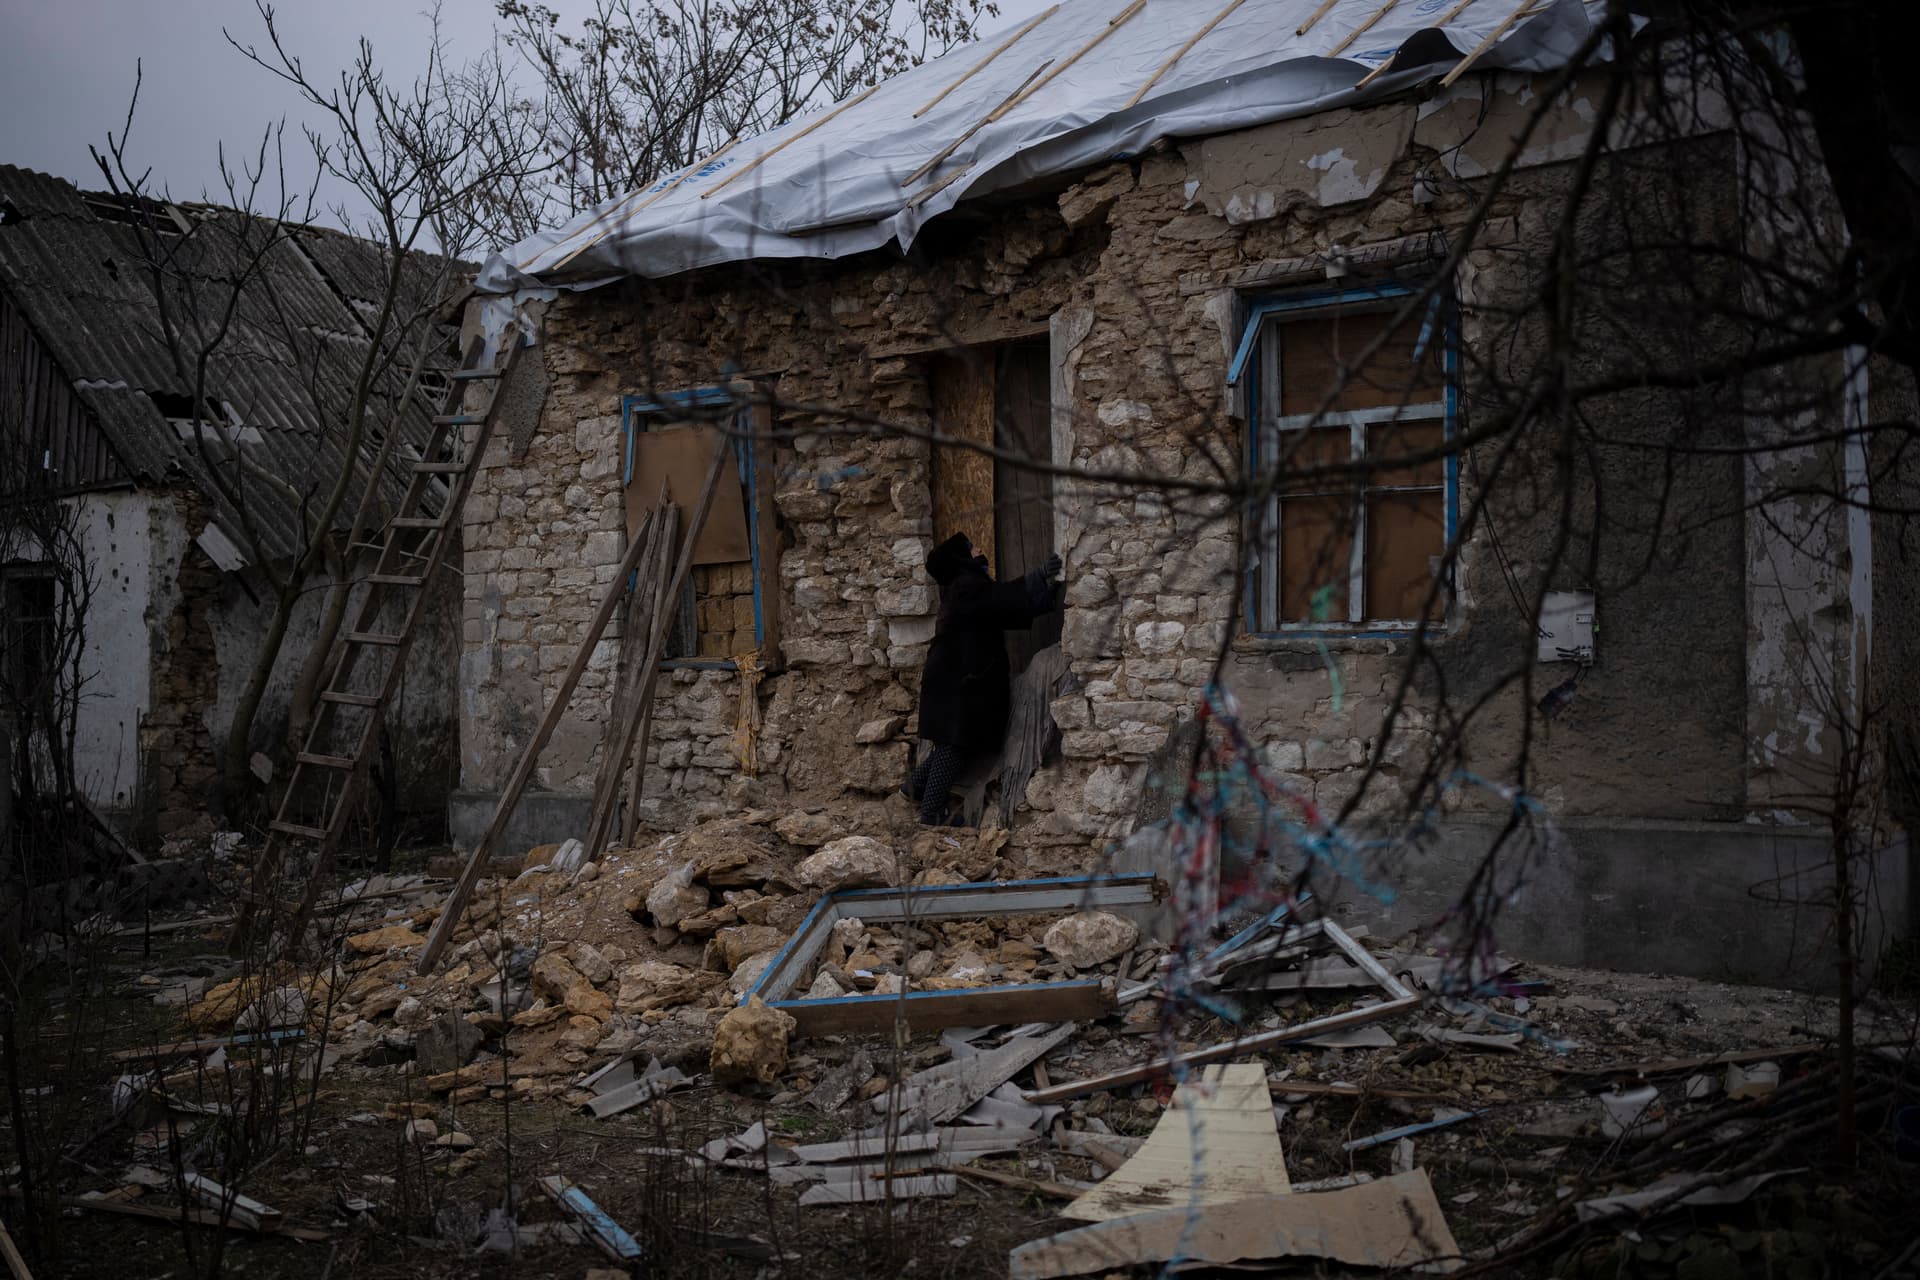 Oleksandra Hryhoryna inspects her house which was damaged by shelling last fall in Kalynivske